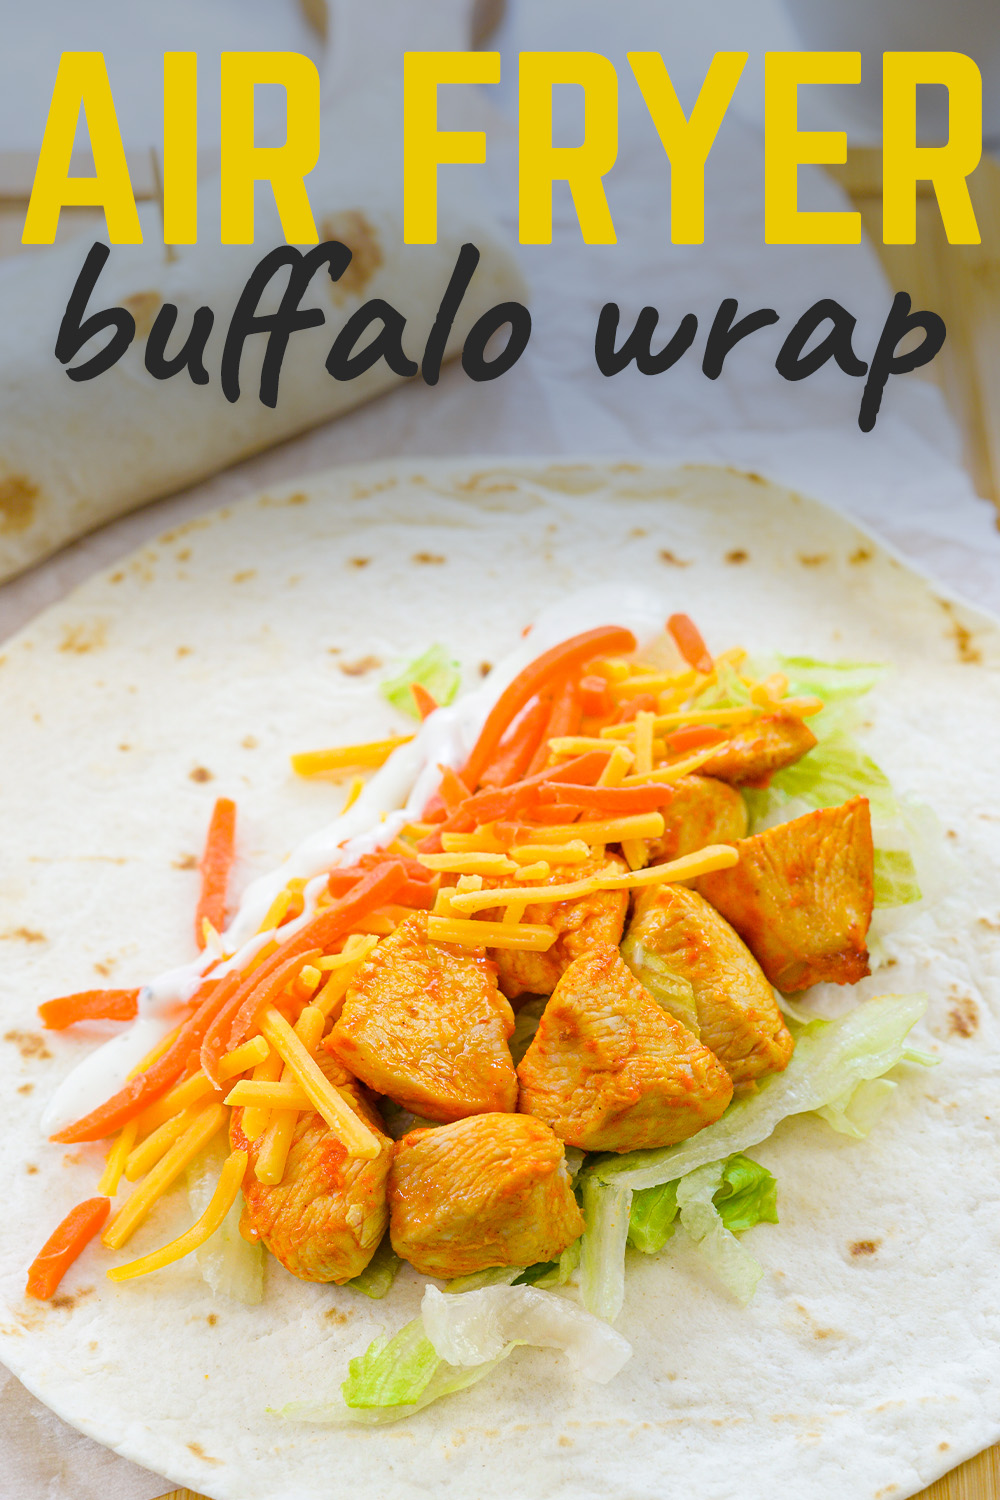 These easy Air Fryer Buffalo Chicken Wraps are an easy way to get lunch on the table! We toss bits of chicken in buffalo sauce, cook them in the air fryer, and then pile it on a tortilla with cheese, lettuce, and dressing to make a simple, flavorful wrap!